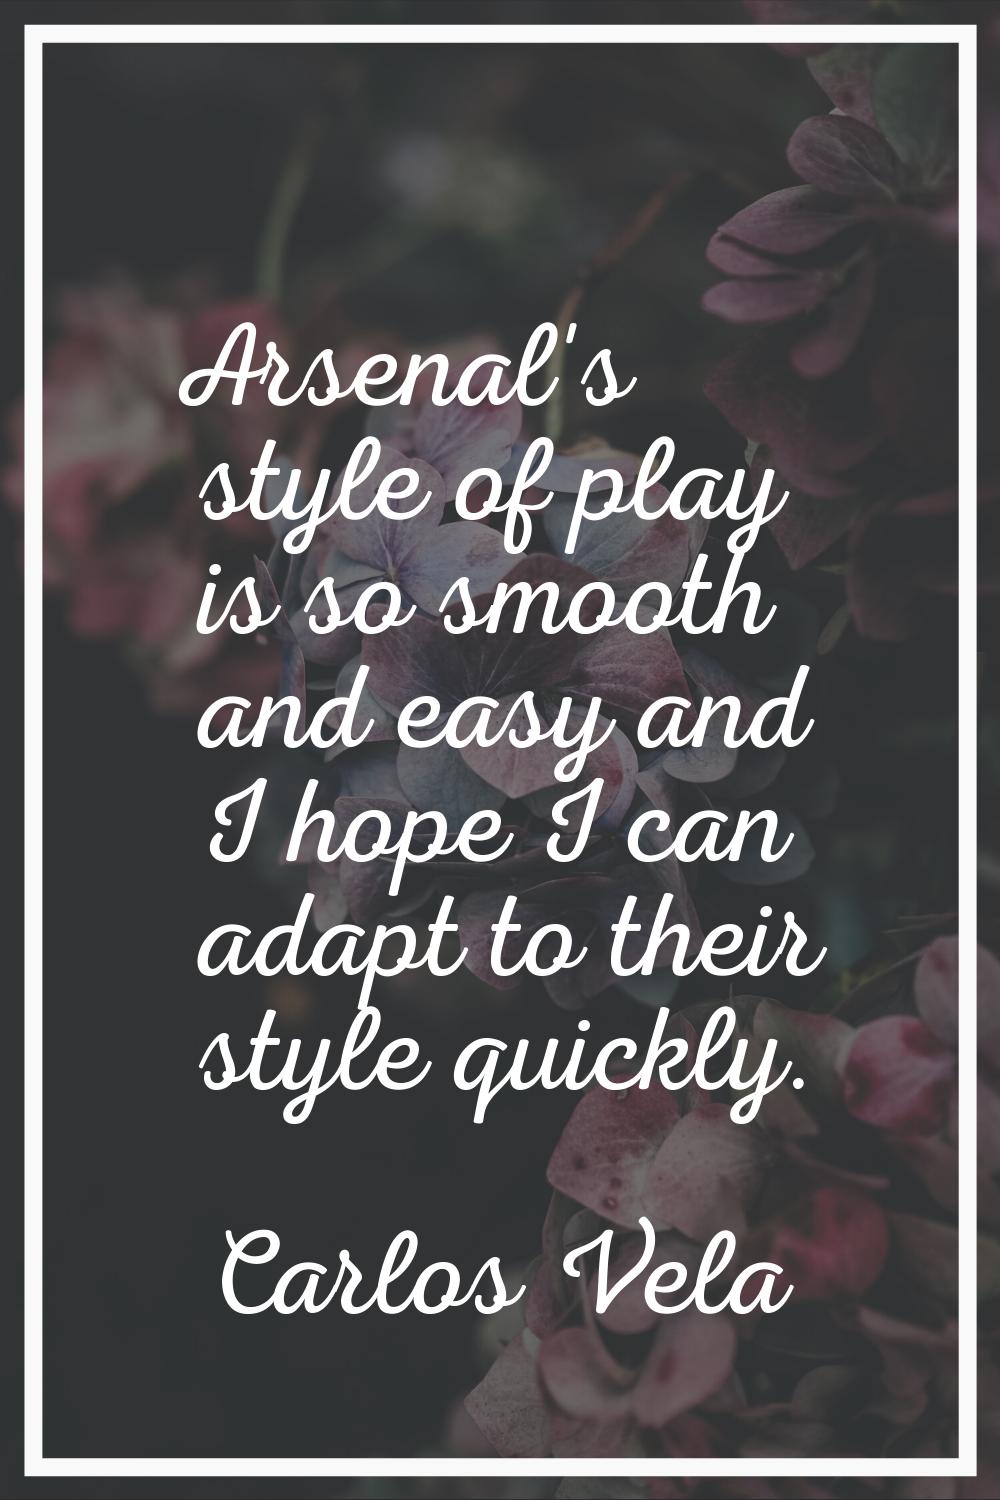 Arsenal's style of play is so smooth and easy and I hope I can adapt to their style quickly.